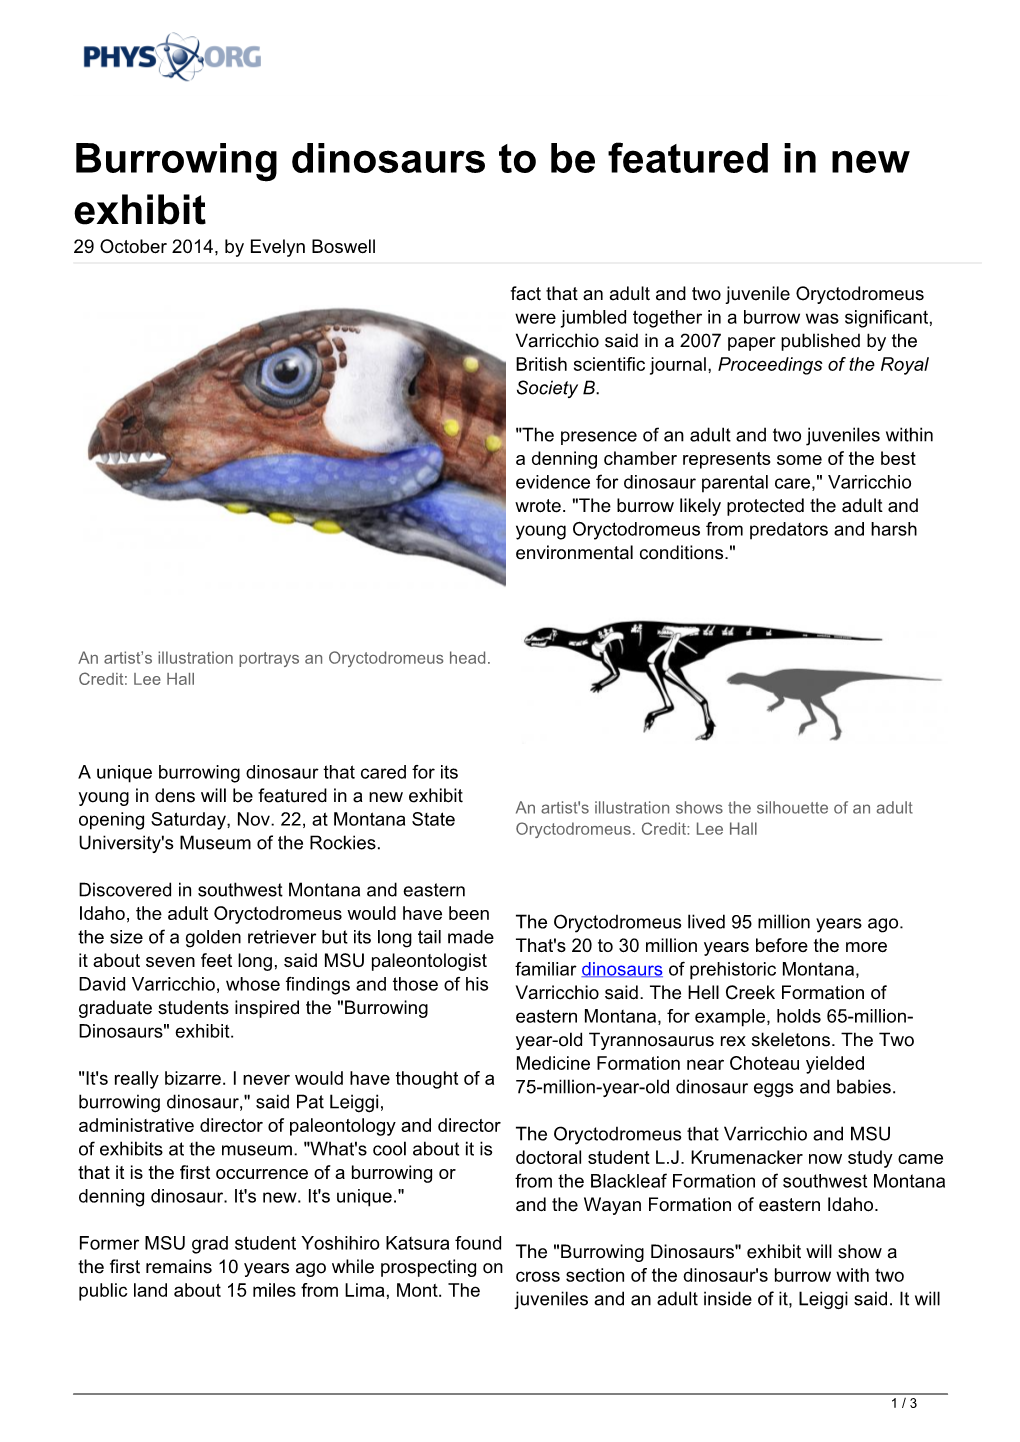 Burrowing Dinosaurs to Be Featured in New Exhibit 29 October 2014, by Evelyn Boswell